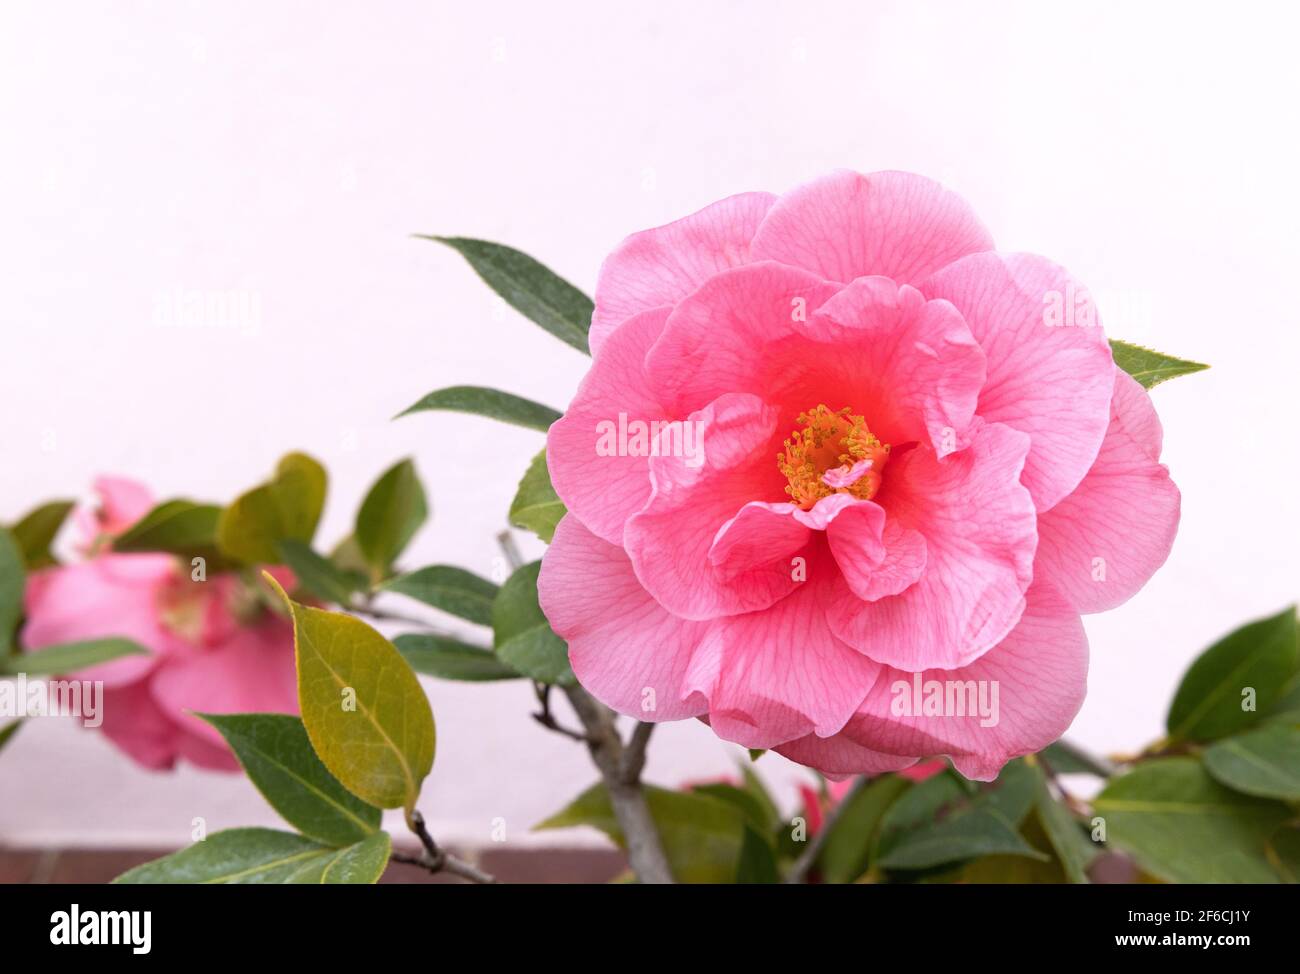 Camellia flower close up; Camellia Japonica aka Common Camellia or Japanese Camellia, close up of the pink flower, UK Stock Photo